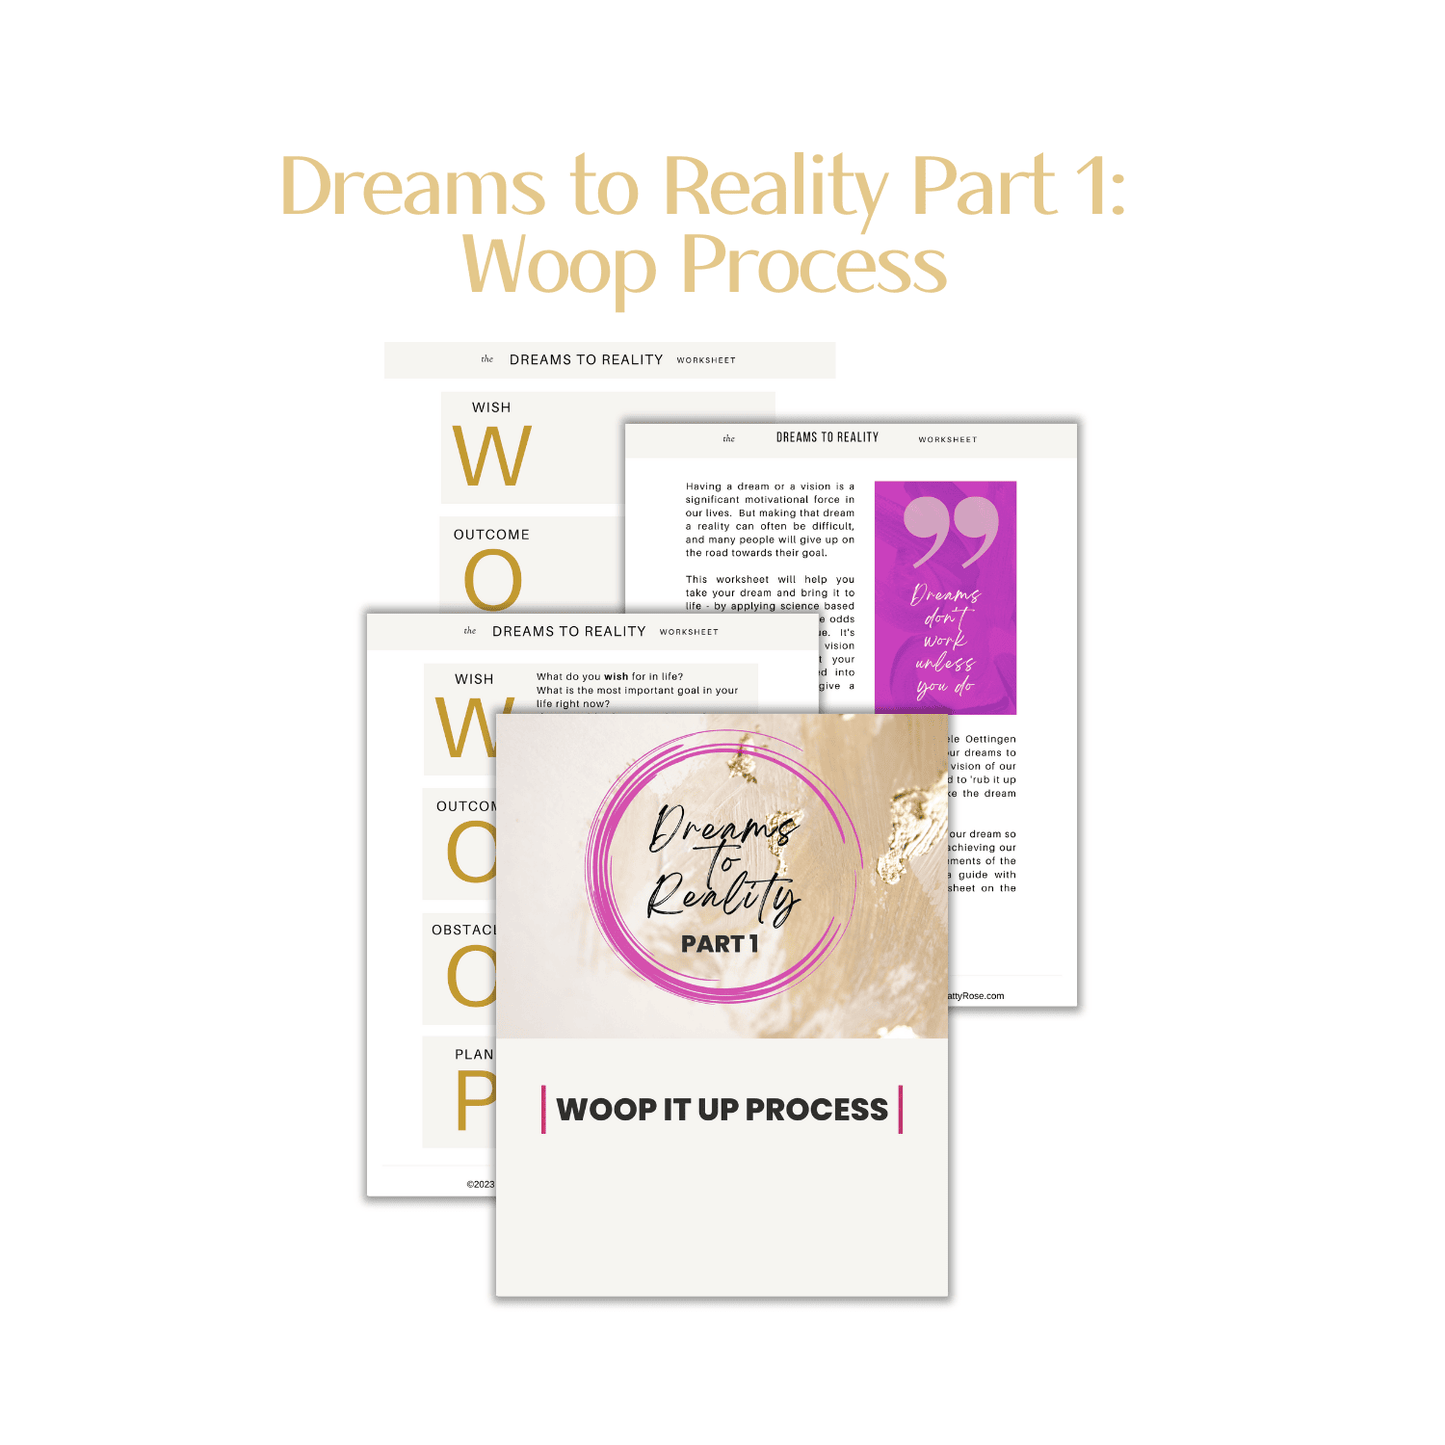 Mockup-of-the-pages-from-the-Dreams-to-Reality-Part-1_-Woop-Process-by-Patty-Rose-Polka-Dot-Patty-Shop